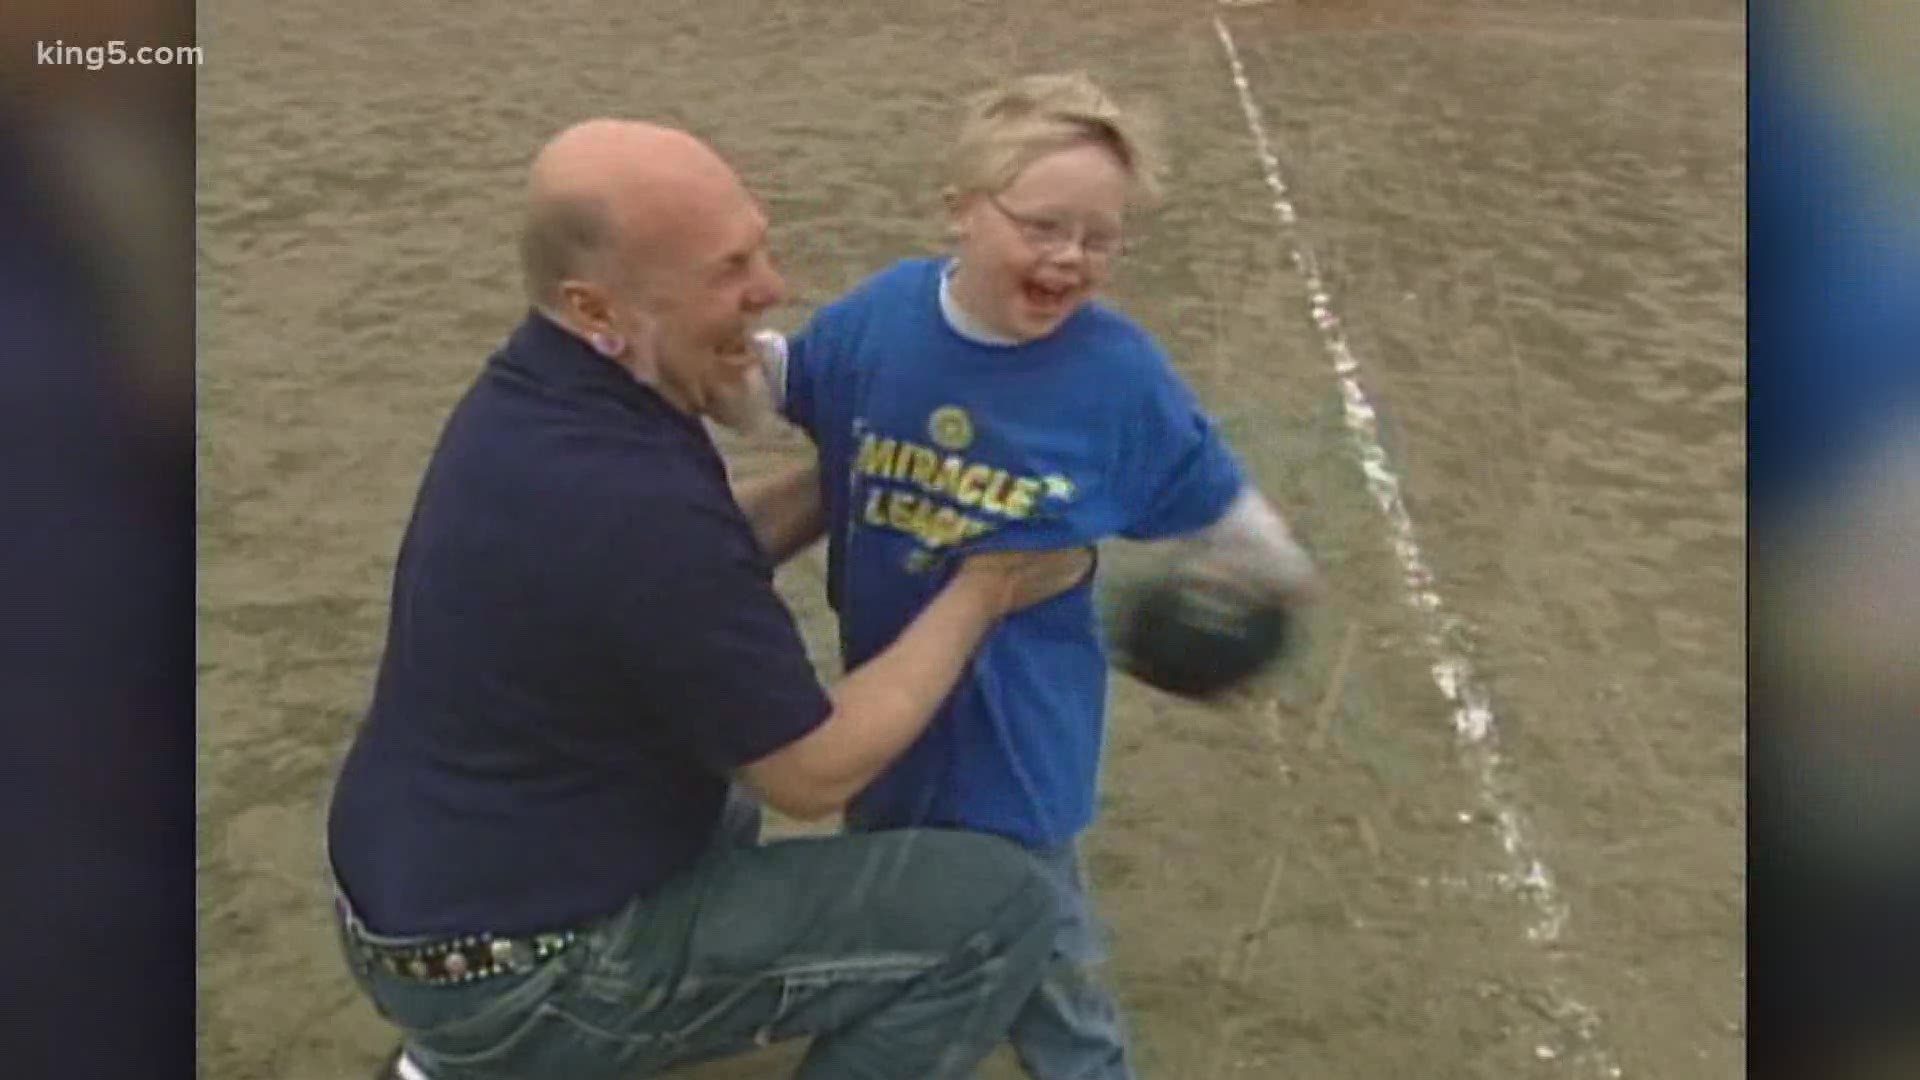 A special story from the KING 5 Sports Vault. Monroe's Miracle League brings together young athletes with special talent.